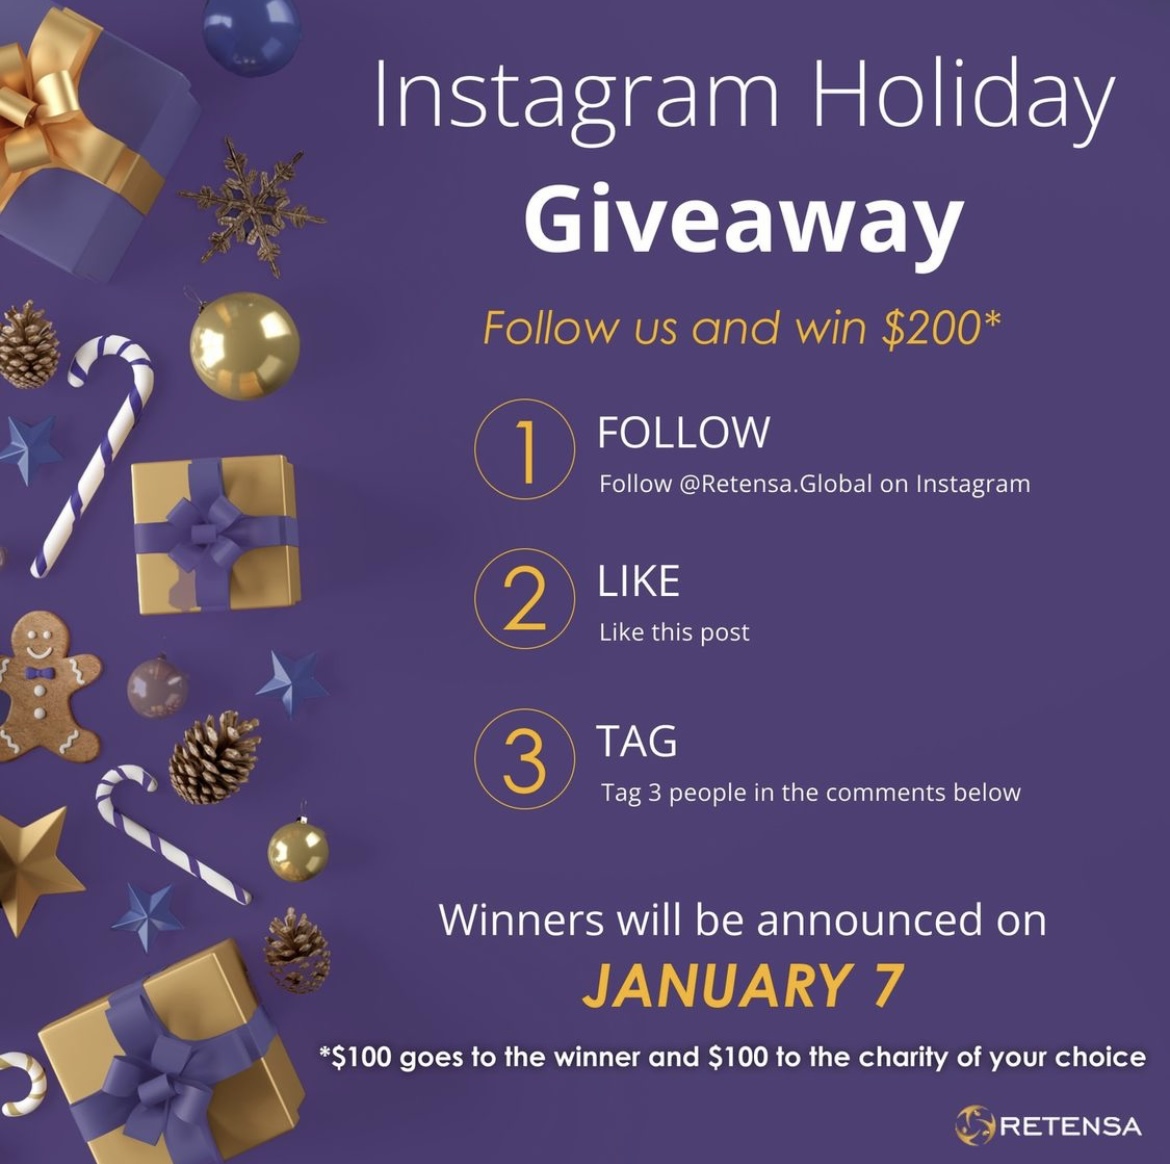 Instagram holiday giveaway to show employee recognition